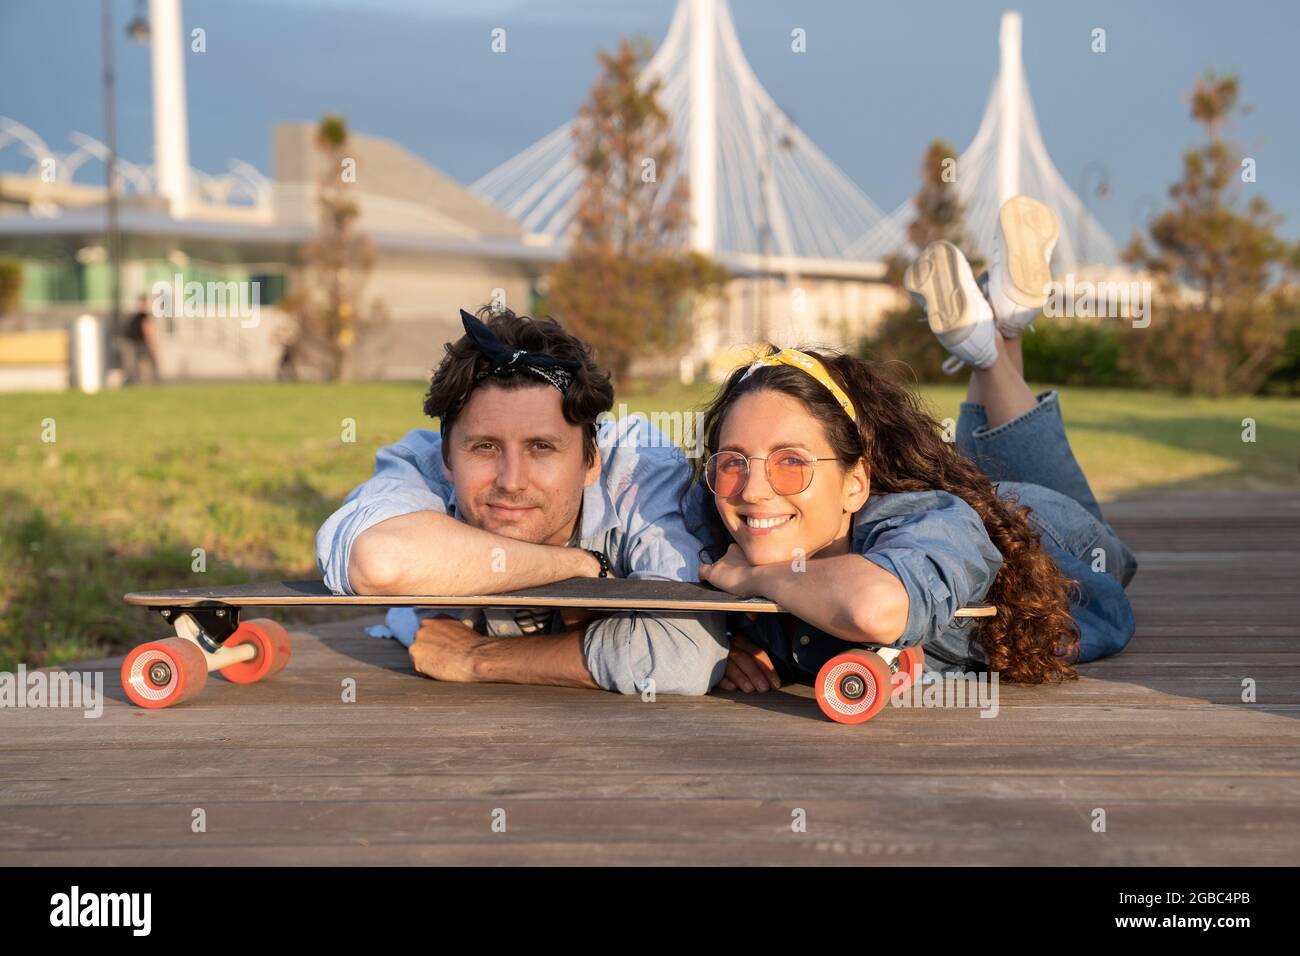 Young smiling couple chilling on longboard in city park at summer sunset. Urban lifestyle concept Stock Photo